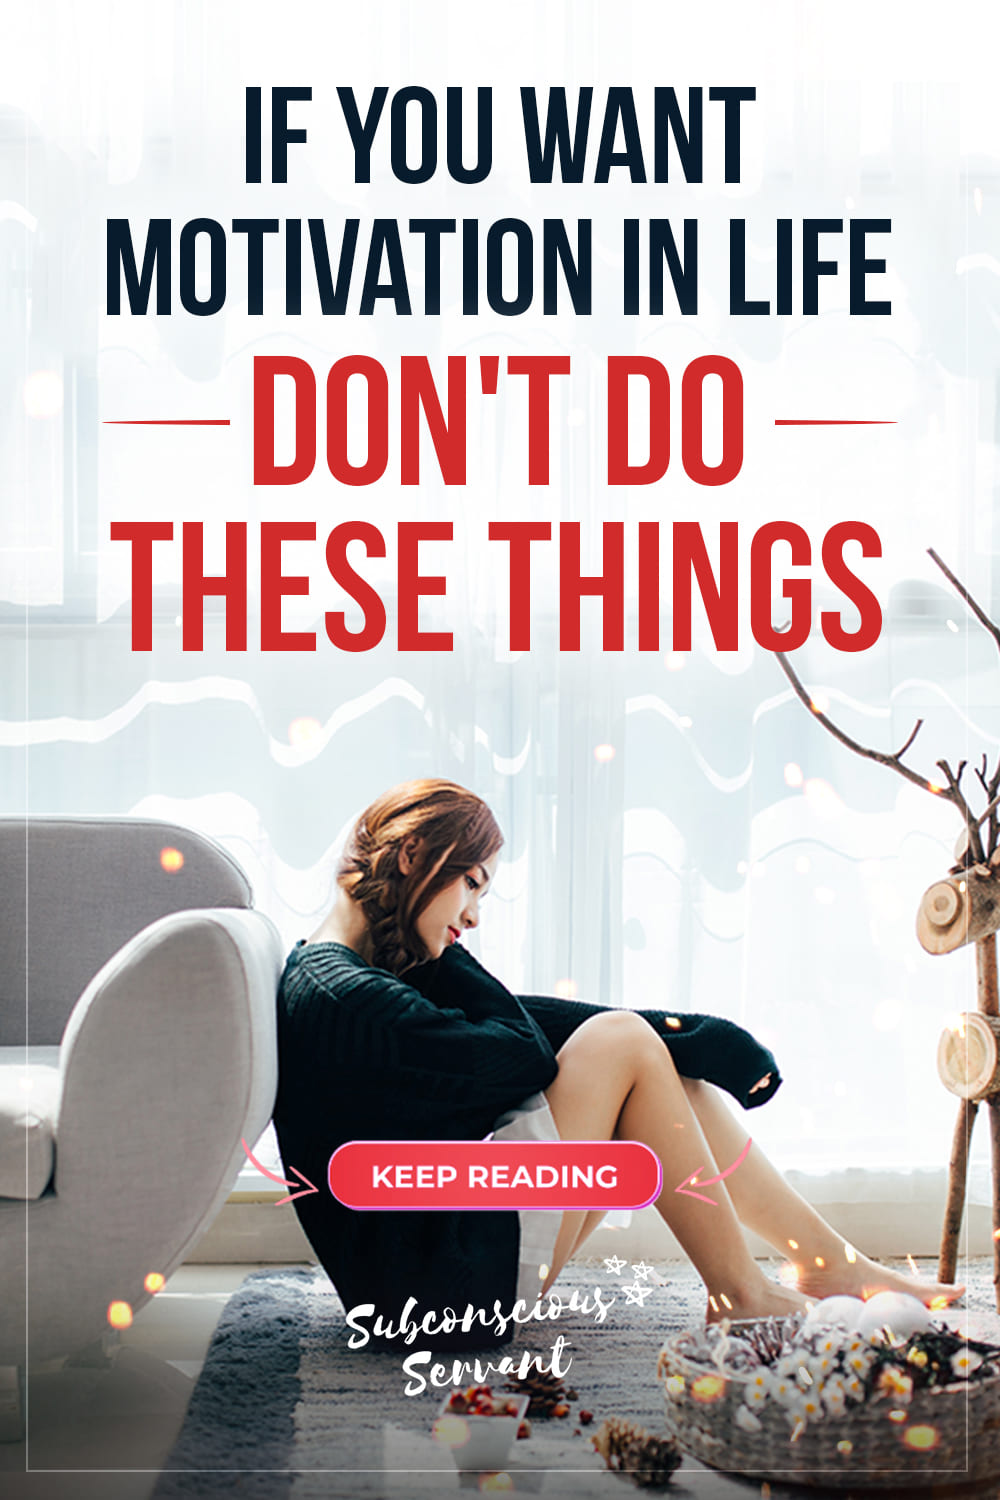 9 Motivation Killers You MUST Be Careful Of!